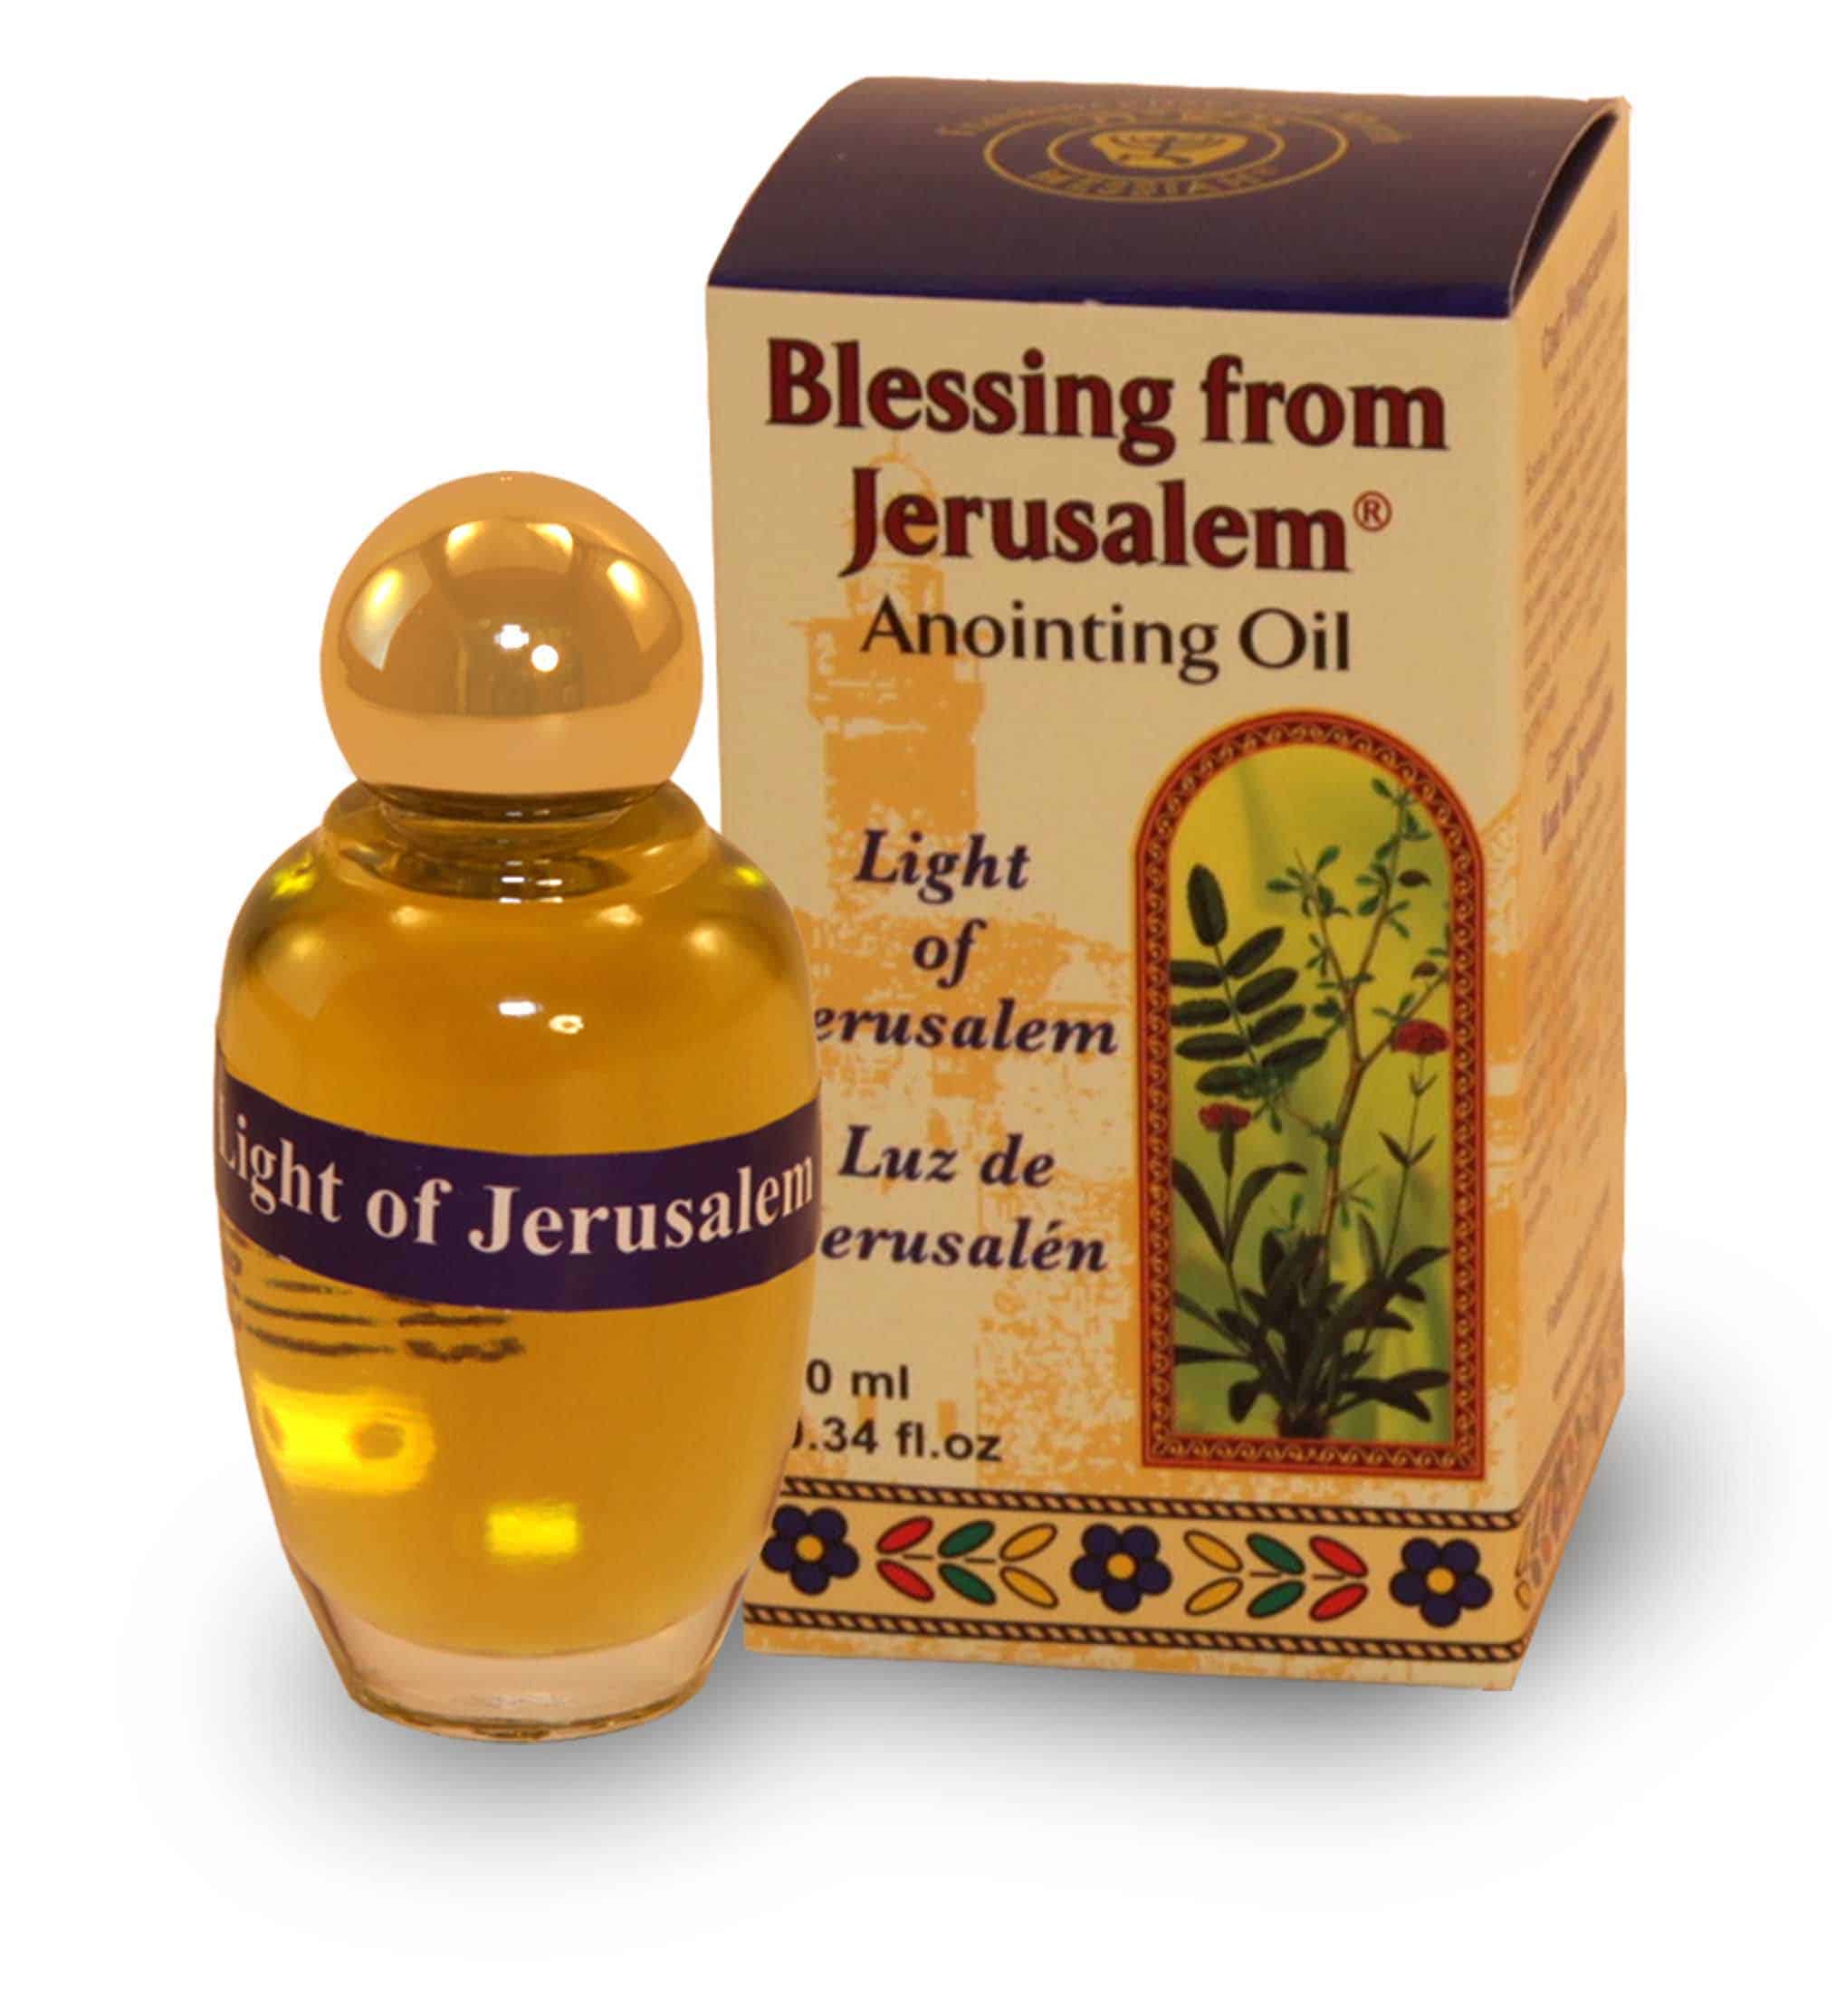 Holy Oil - Queen Esther Anointing Oil for Prayer with Biblical Spices, 0.34  fl oz | 10 ml Made in Israel (Queen Esther)